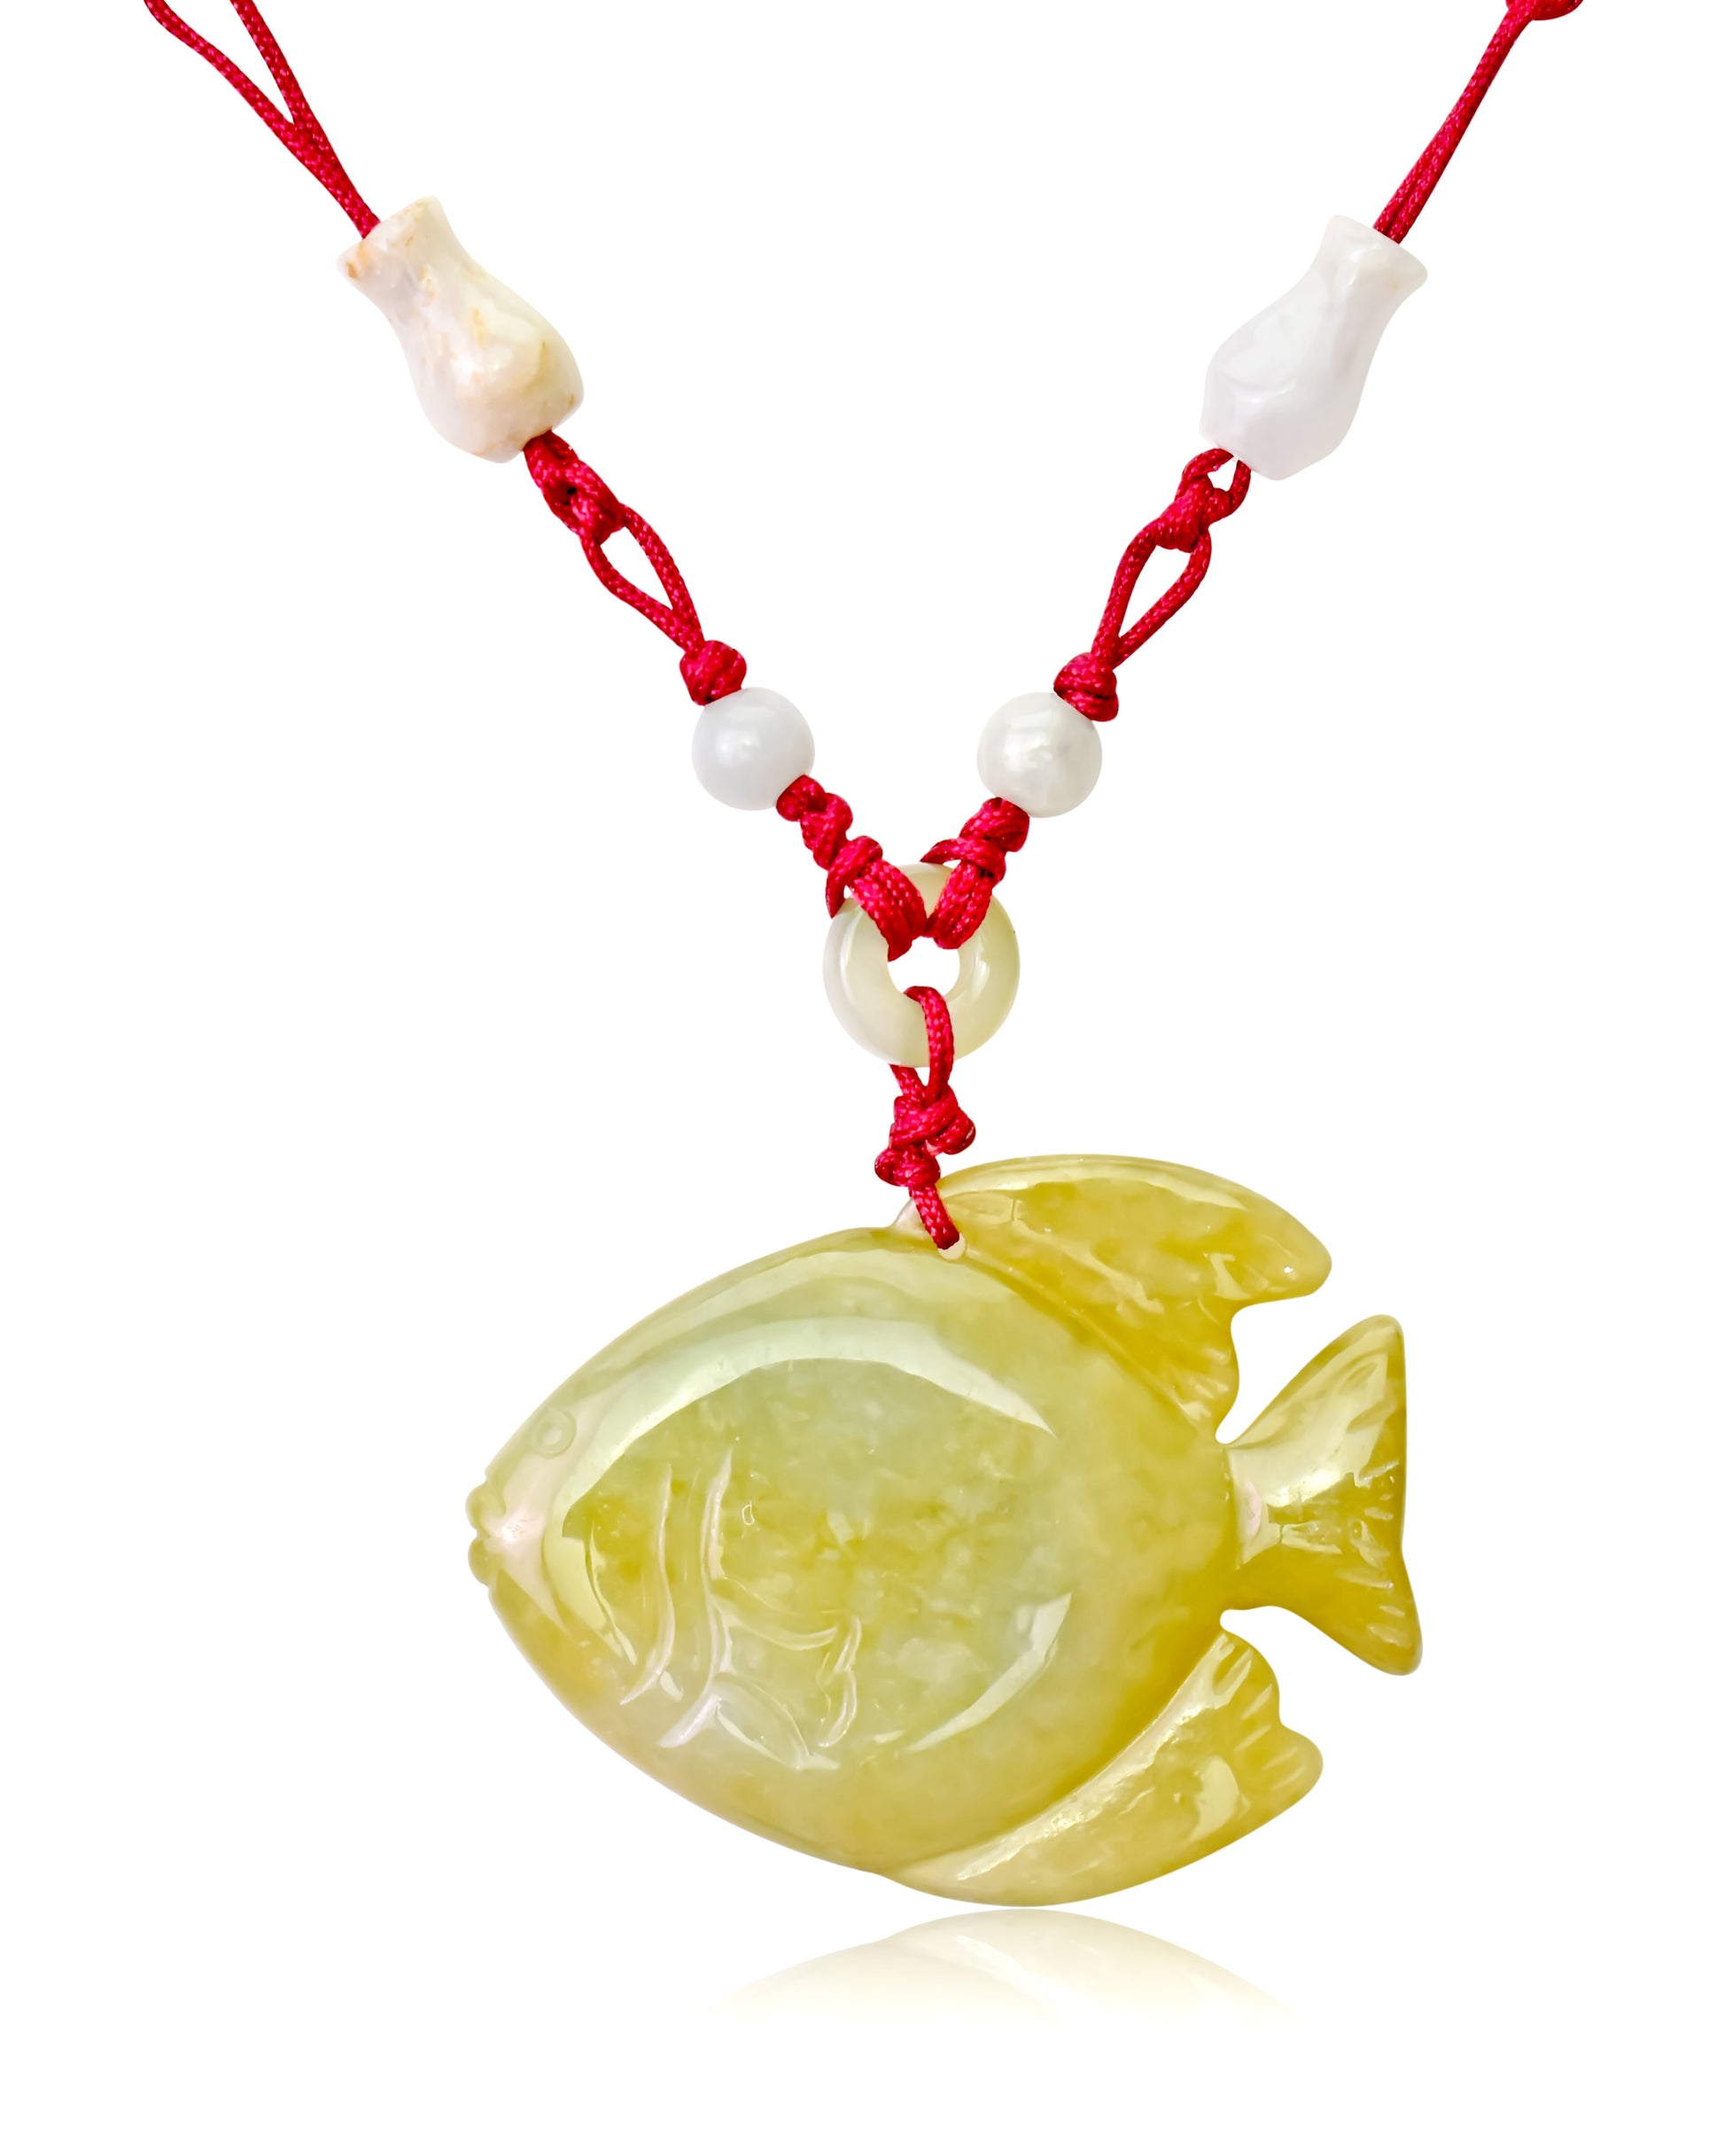 Get Noticed with the Royal Fish Handmade Jade Necklace